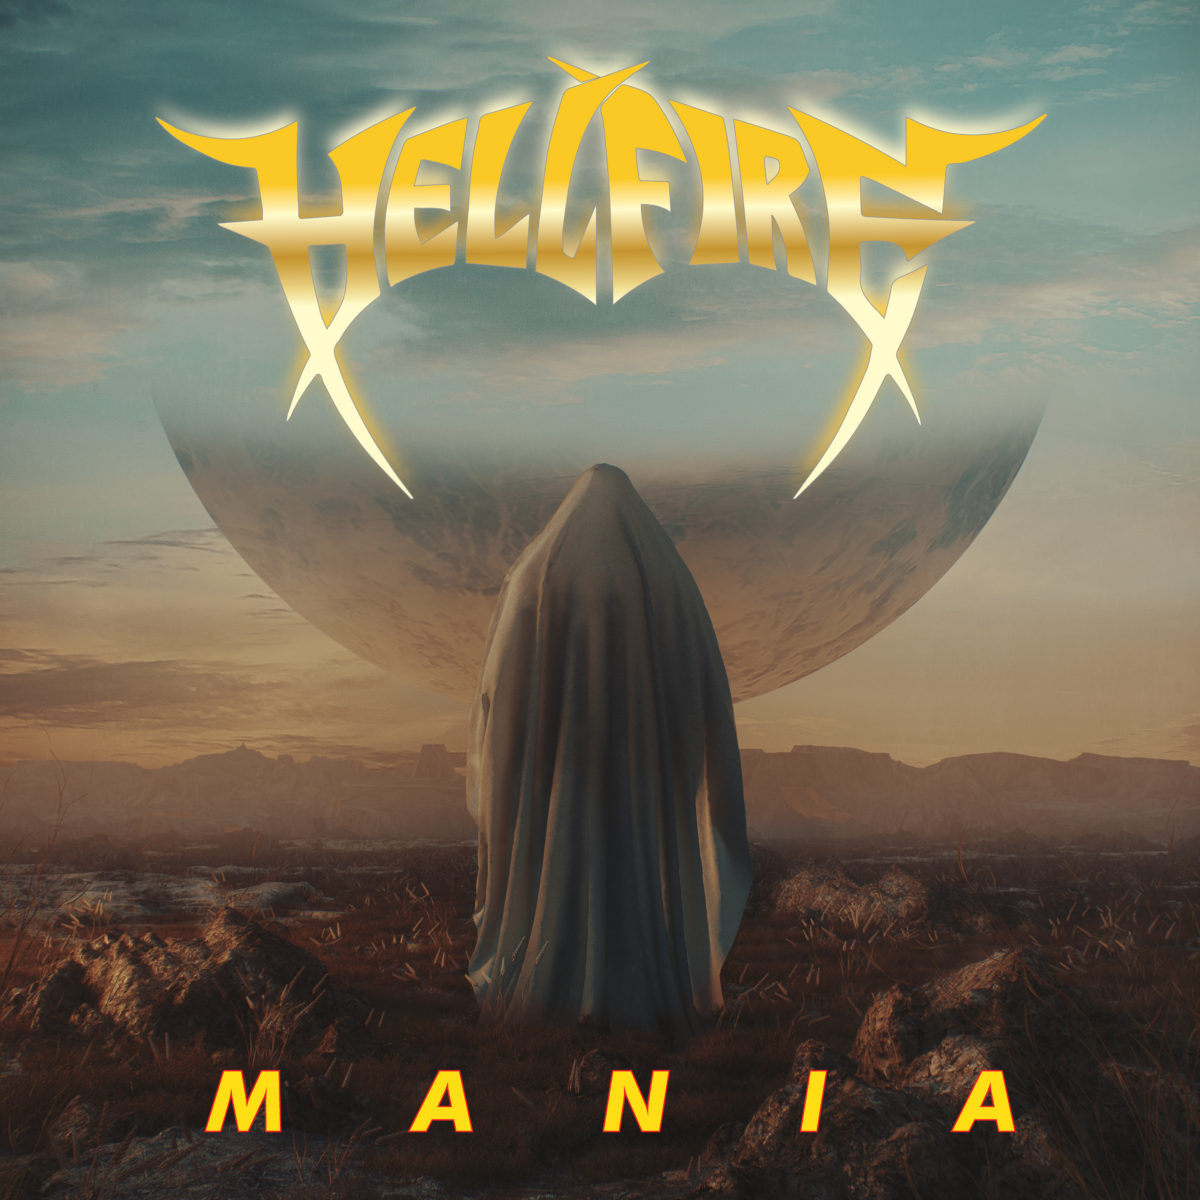 Hell Fire Mania 4000